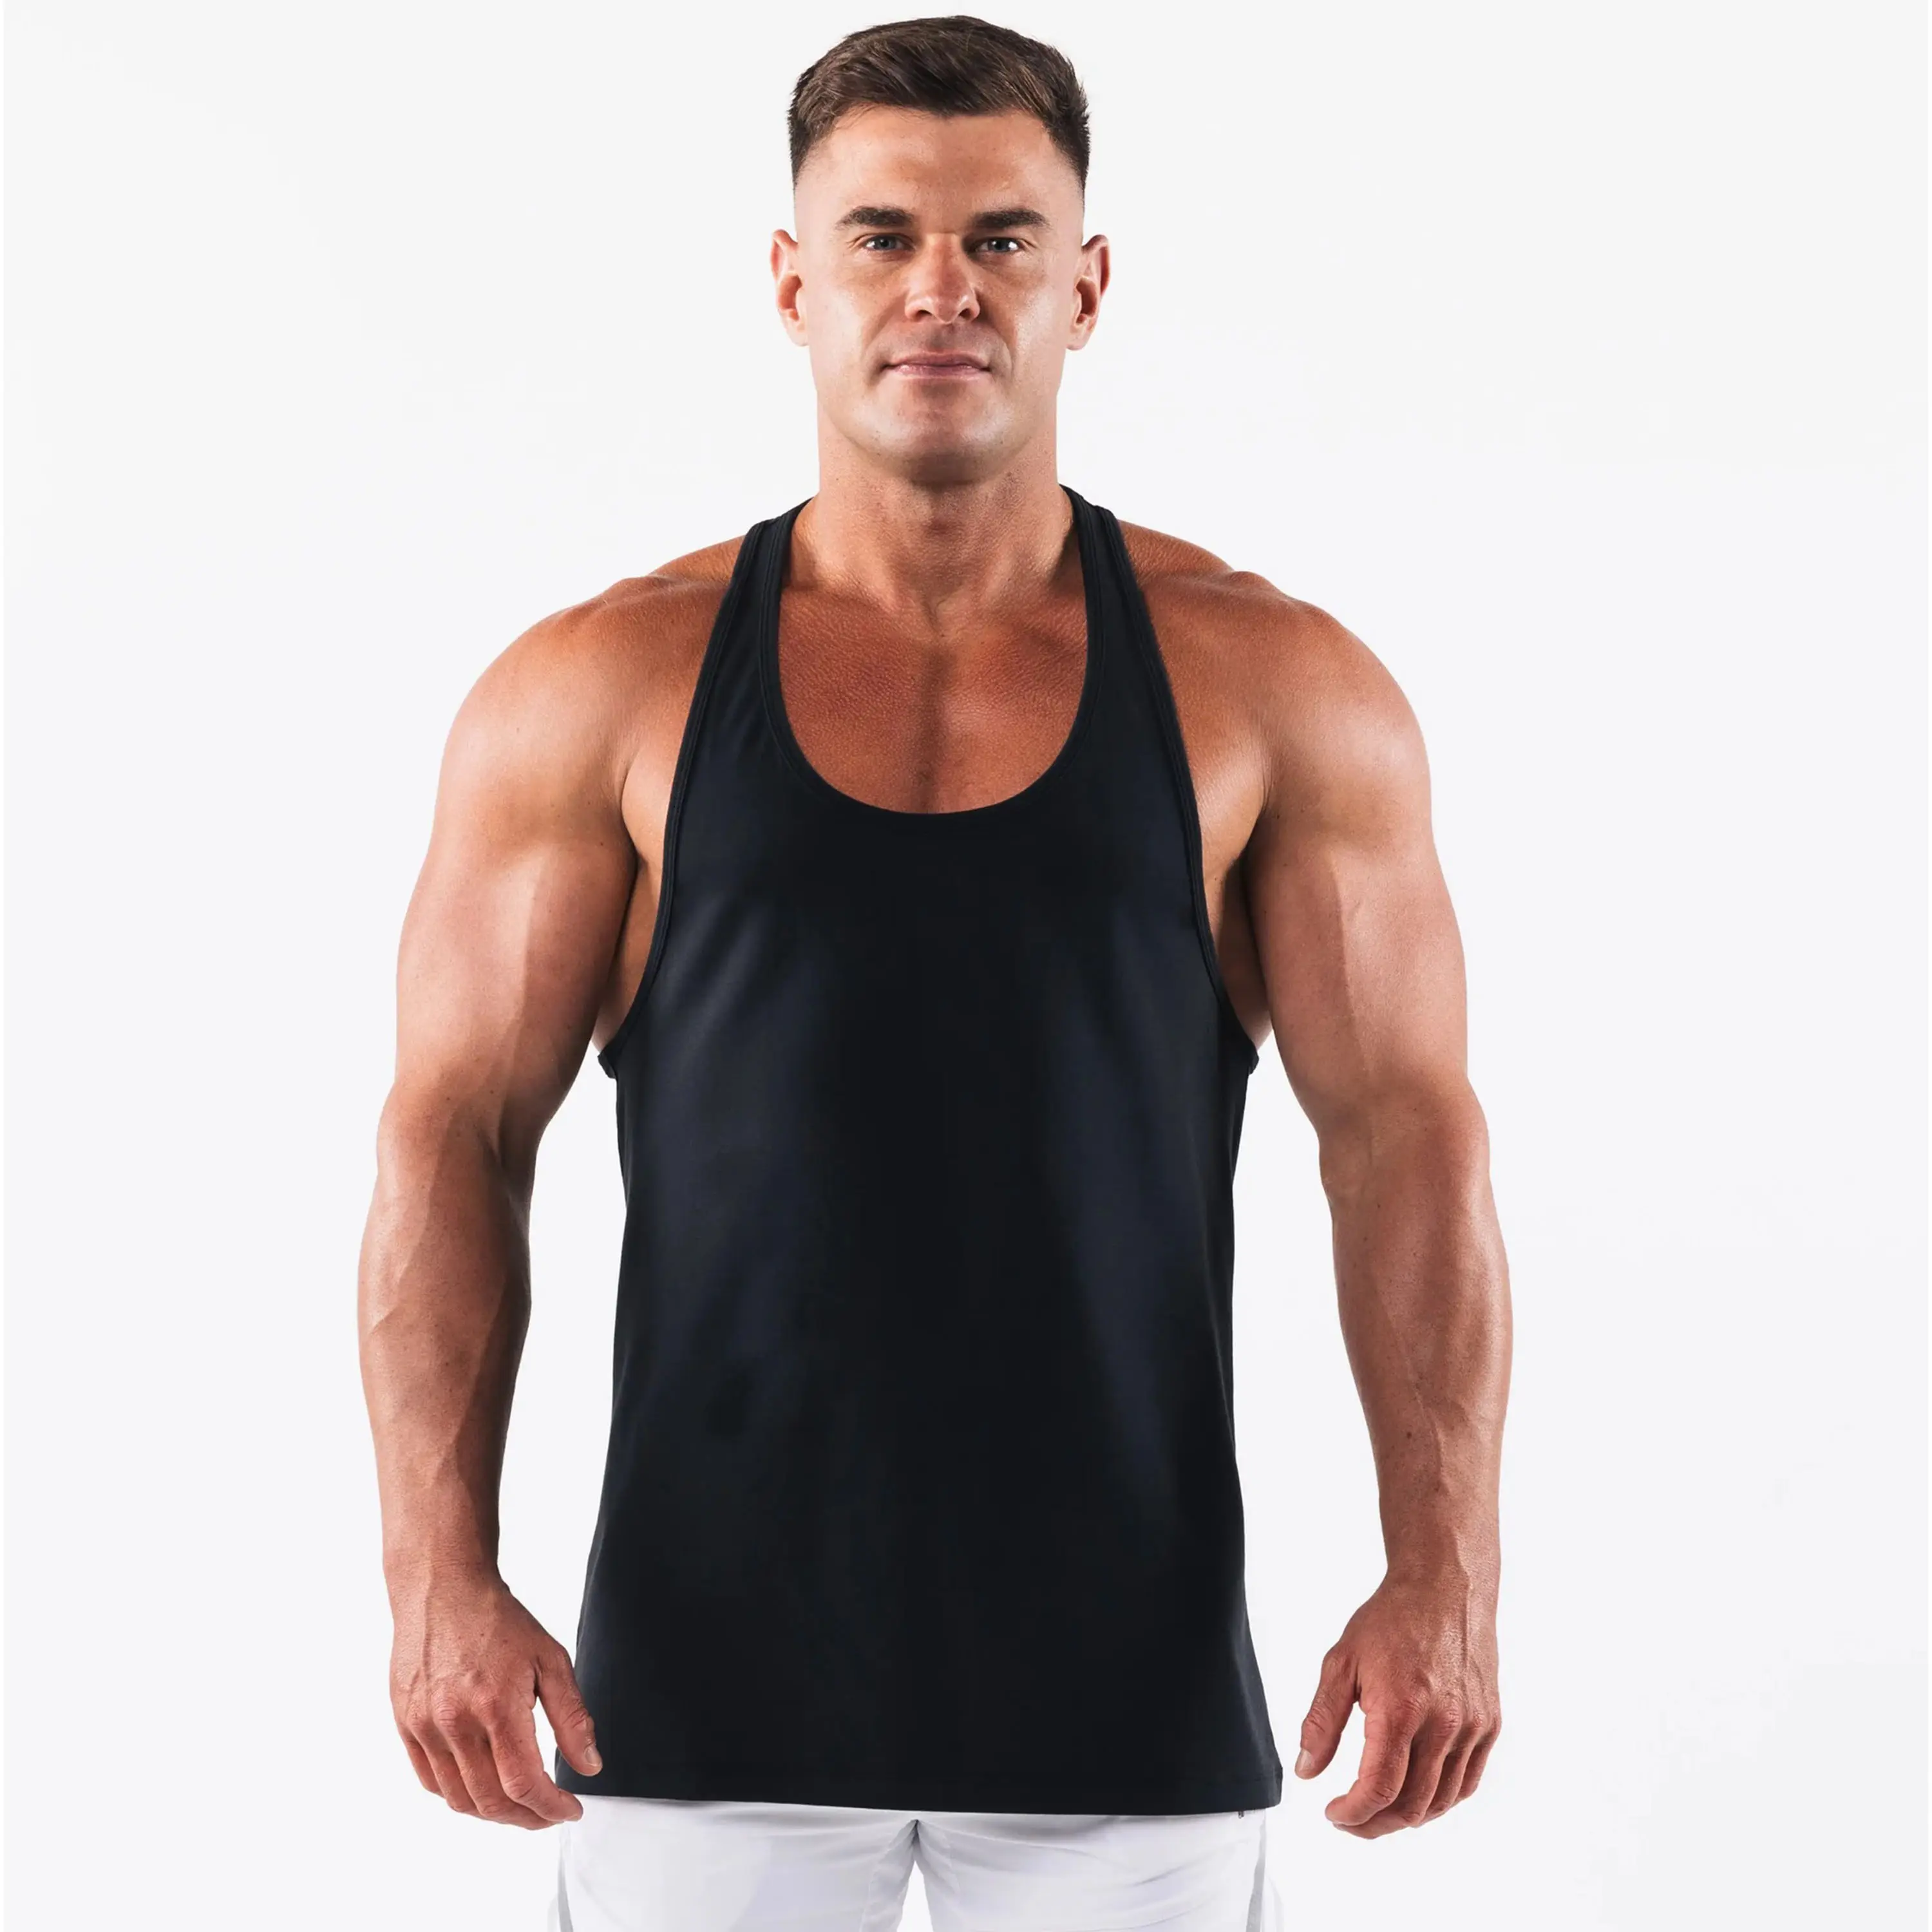 Wholesale Bodybuilding Muscle Workout Fitness Gym Shirts Athletic Stringer Solid Gym Wear Tank Top Men